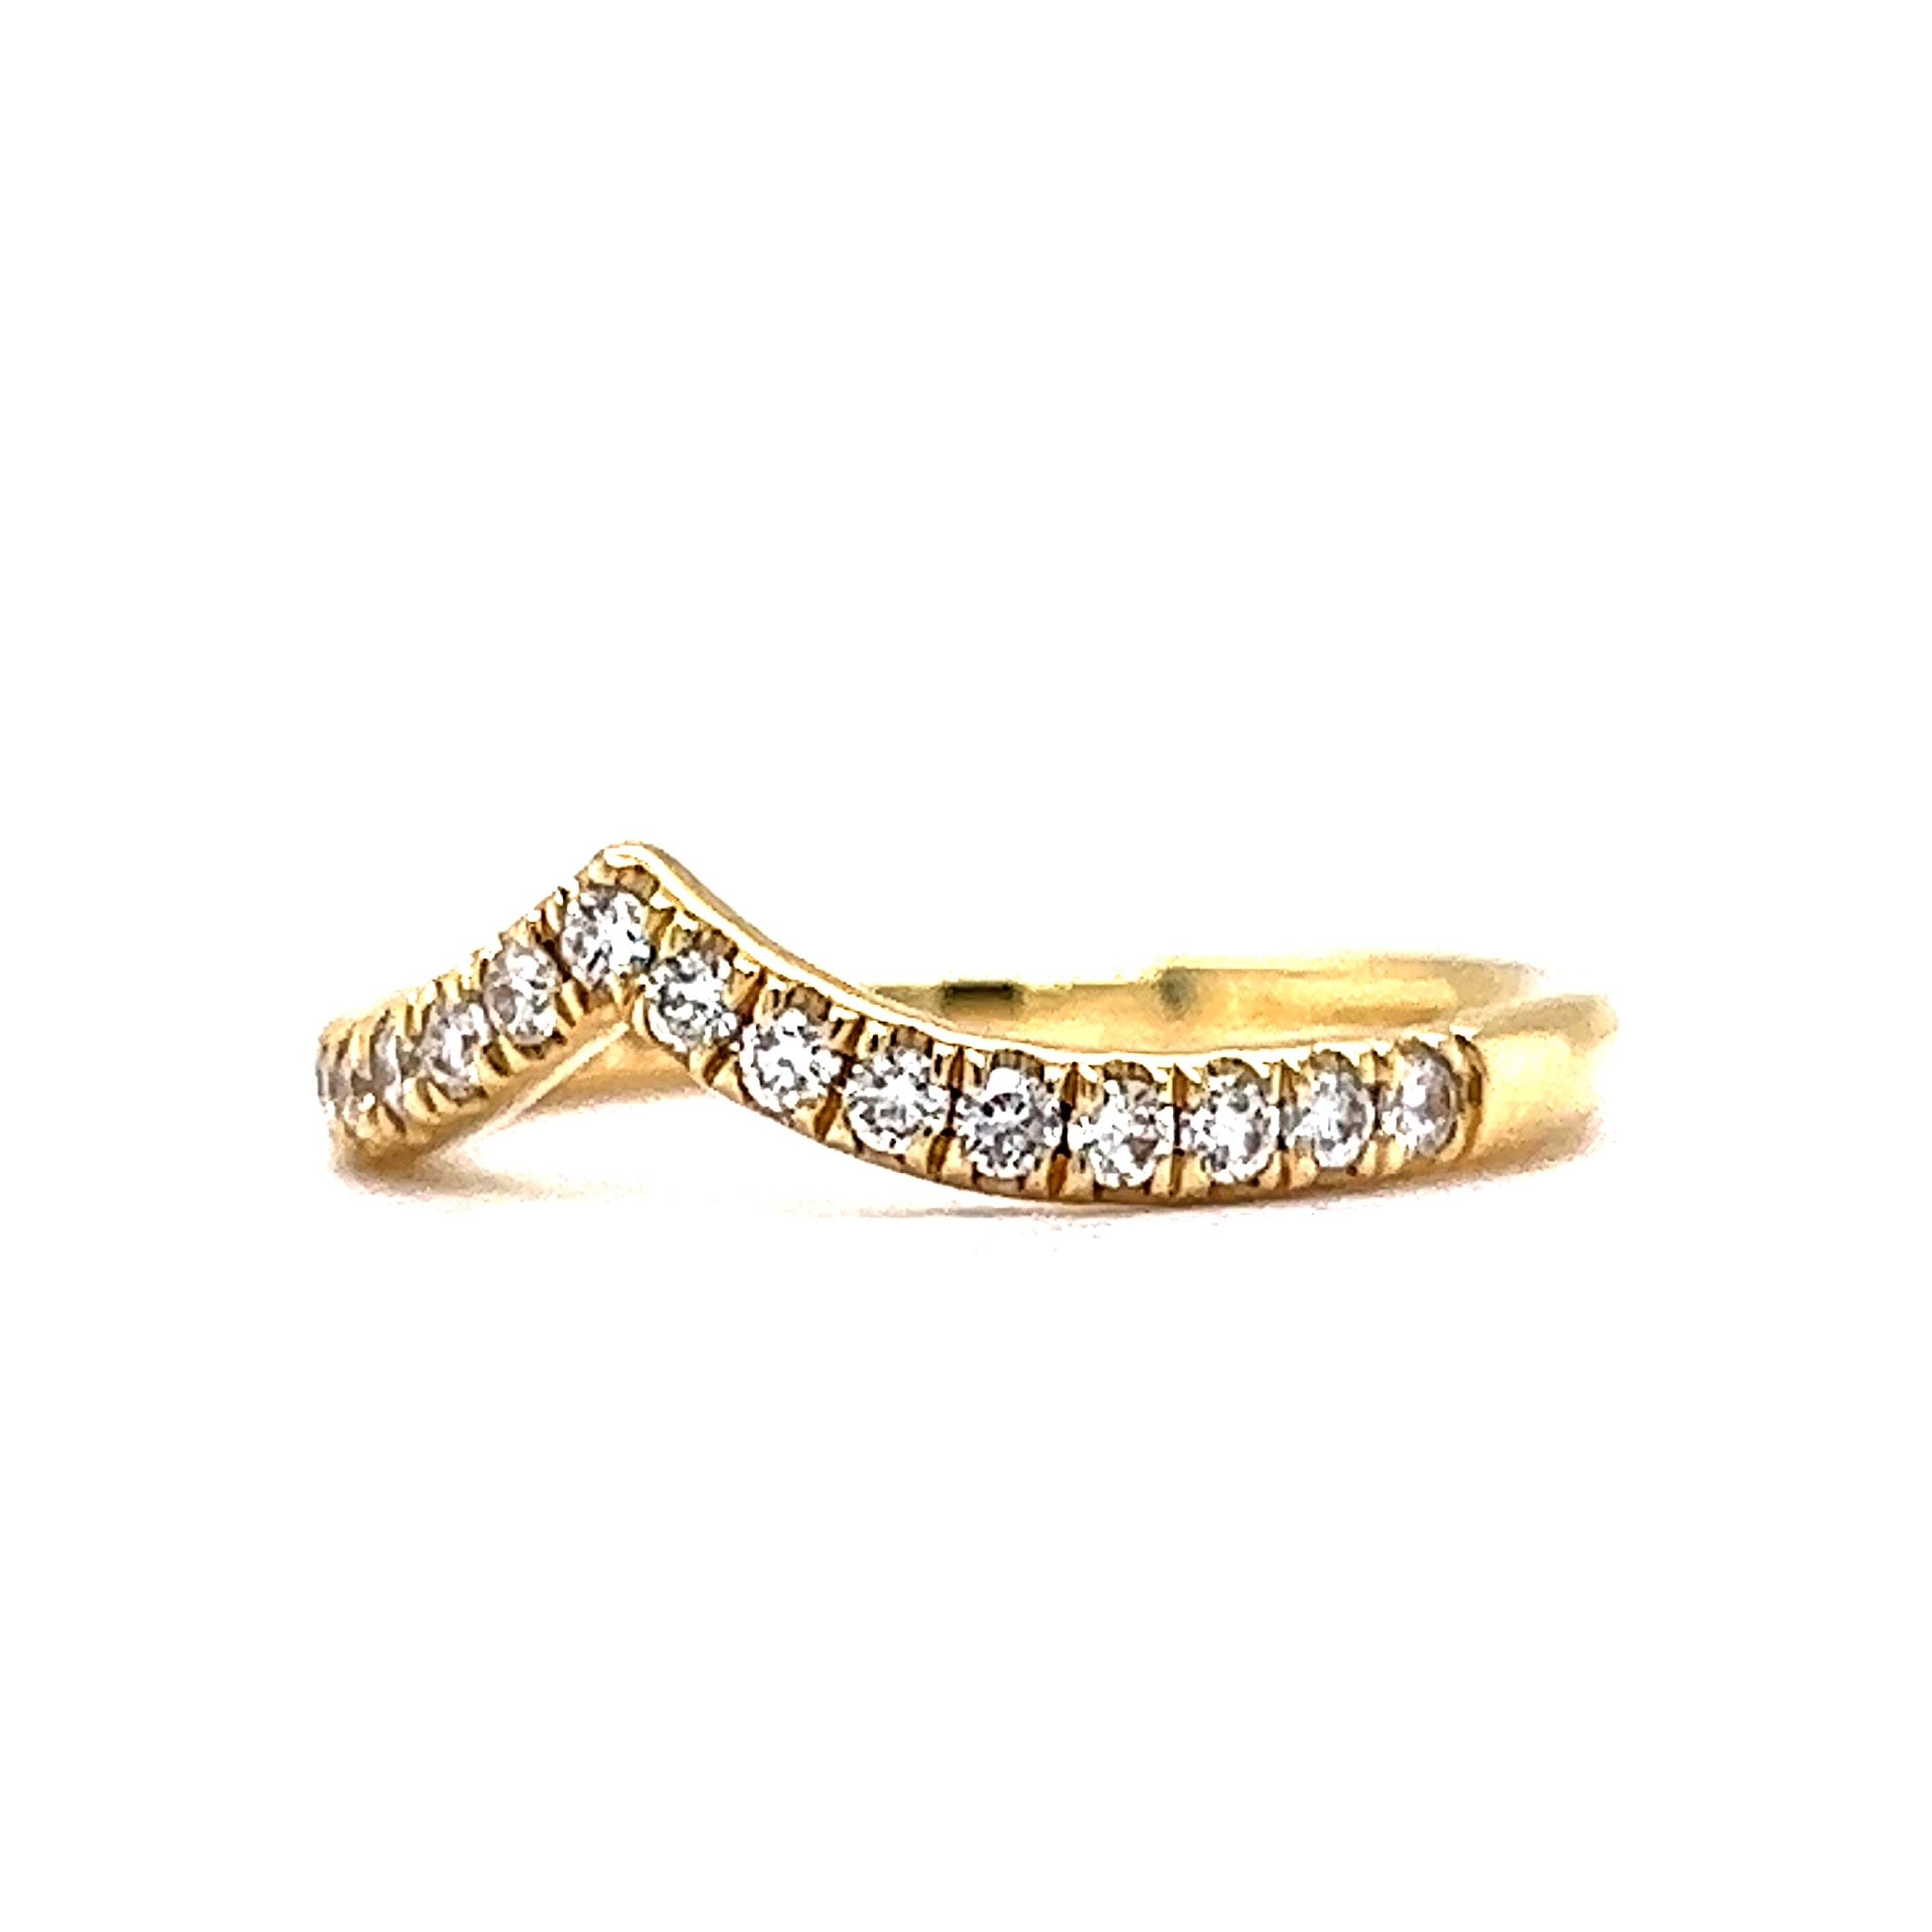 .29 Pointed Diamond Wedding Band in 14k Yellow GoldComposition: 14 Karat Yellow Gold Ring Size: 6.5 Total Diamond Weight: .29ct Total Gram Weight: 2.4 g Inscription: 14k 
      